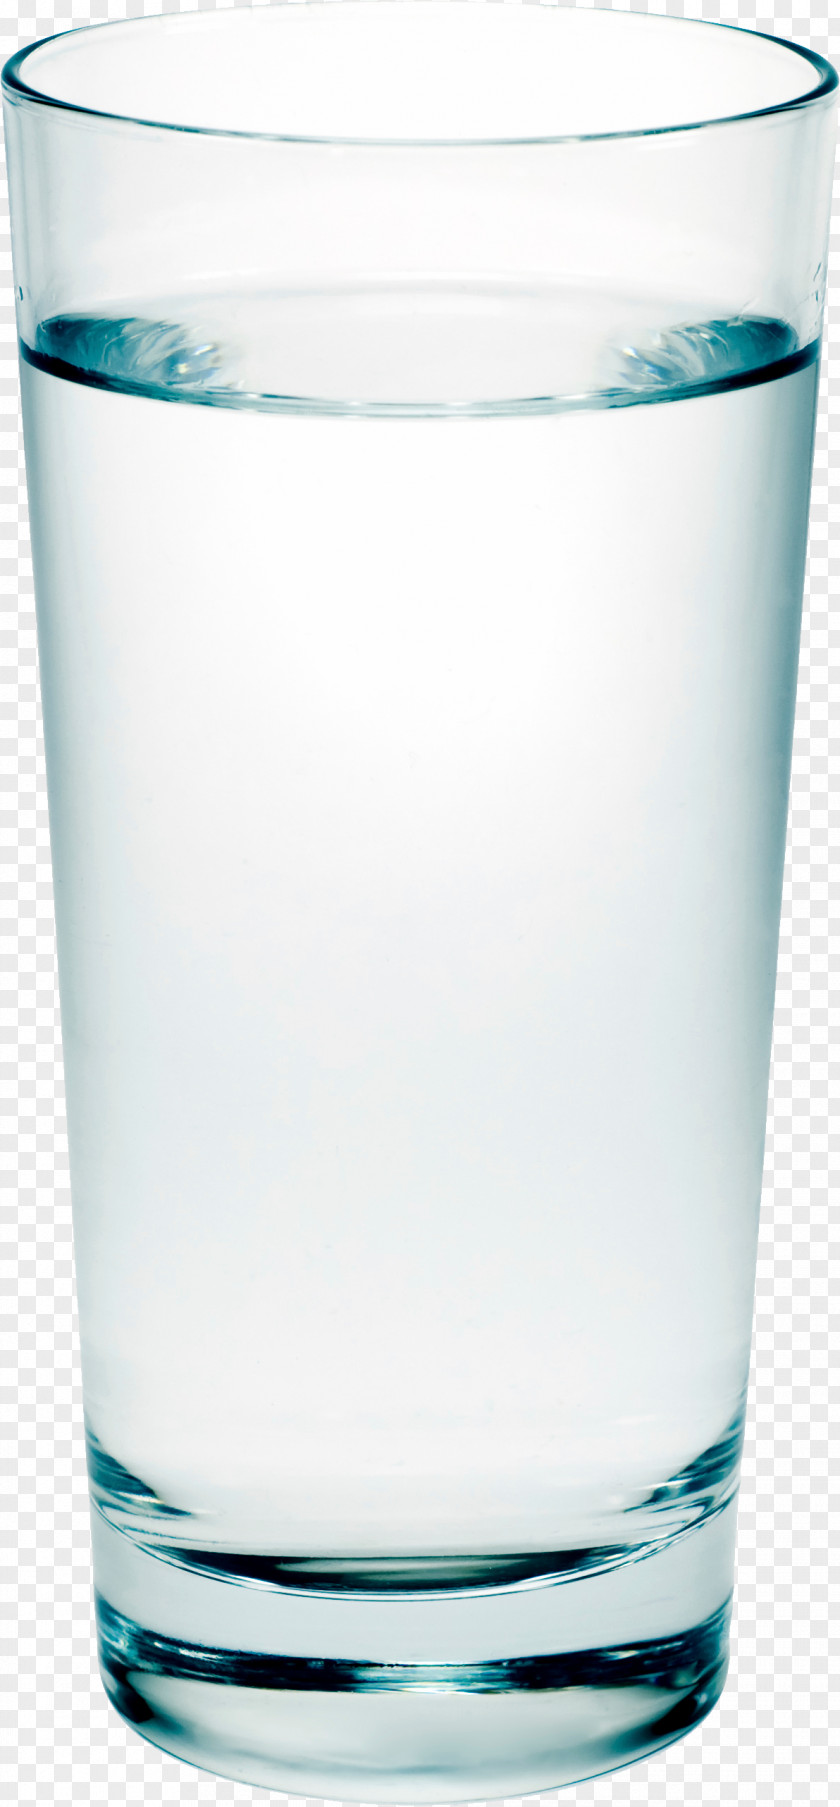 Blue Transparent Water Glass Without Matting PNG